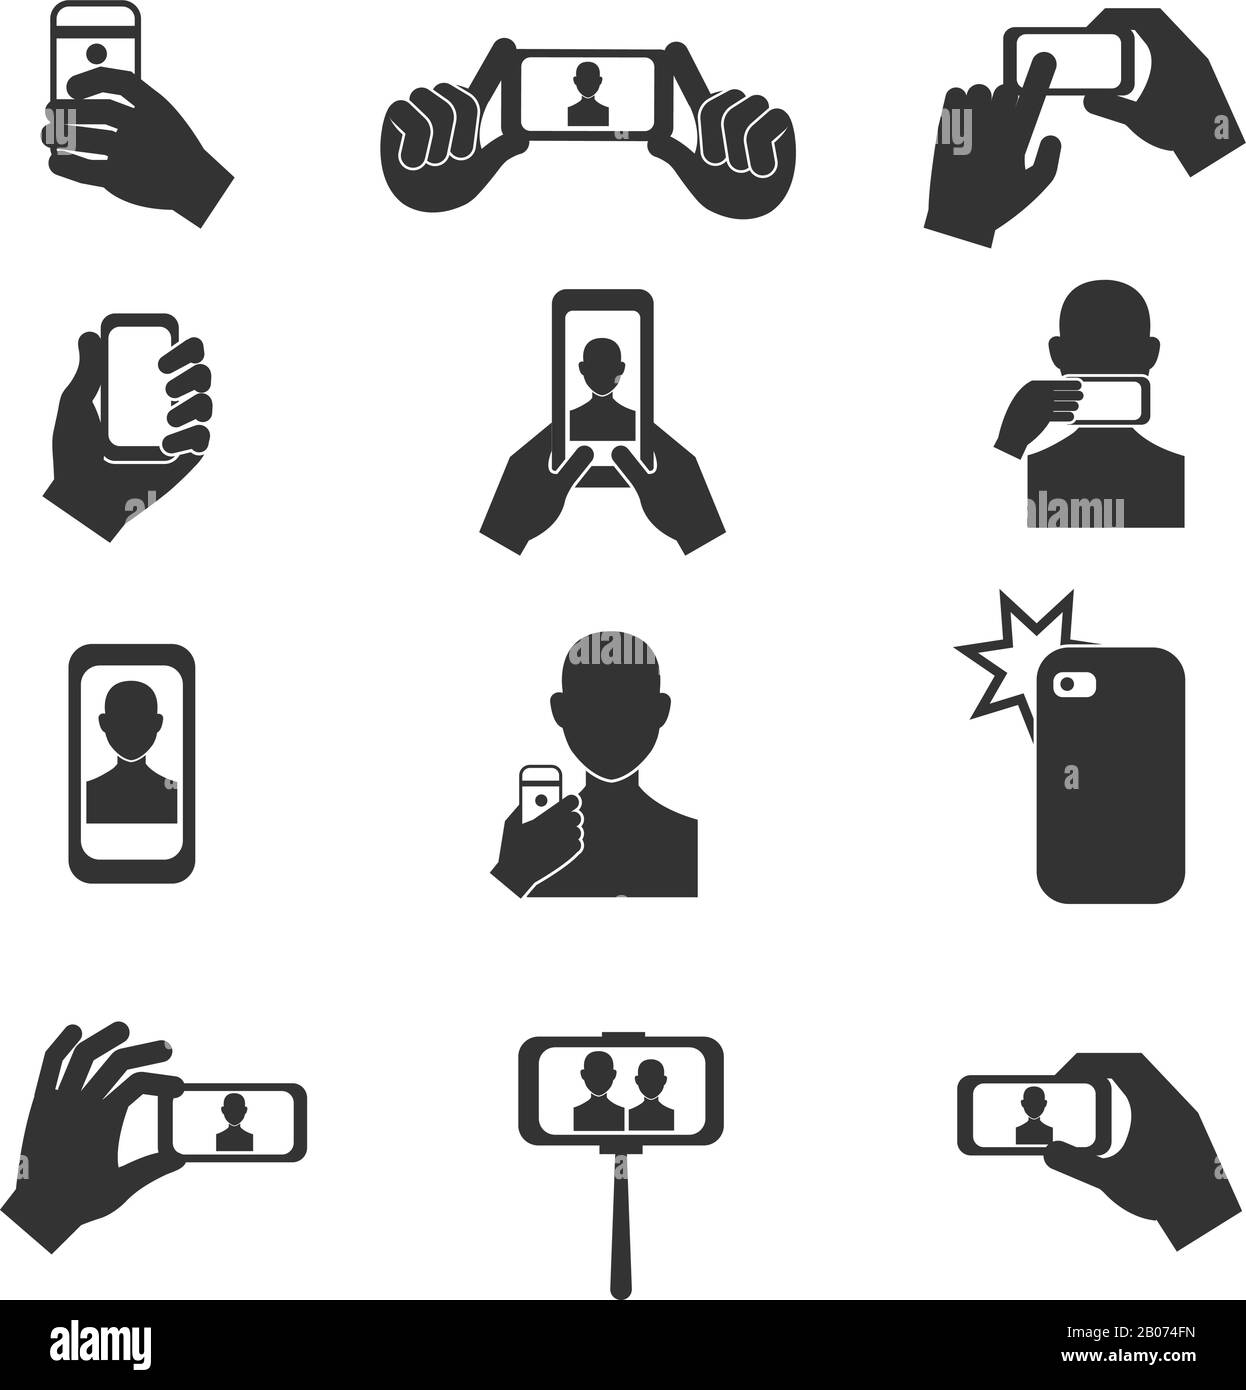 Selfie photo vector icons set. Photography with use smartphone and stick illustration Stock Vector